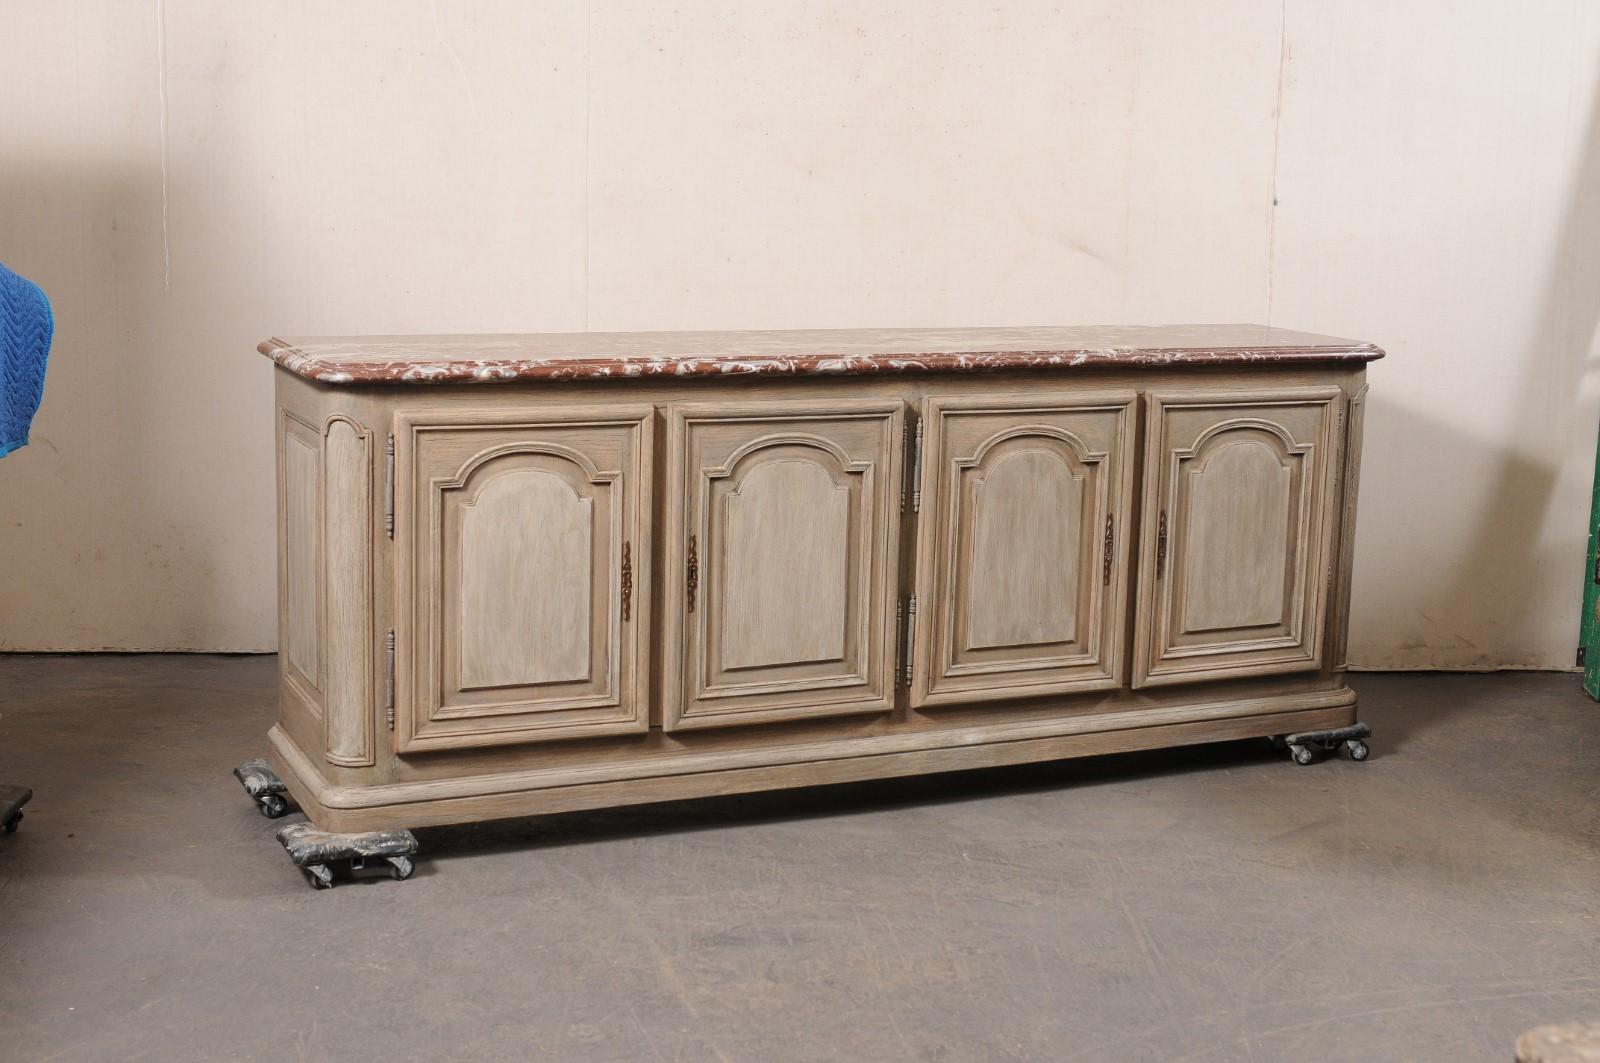 A long French carved and painted wood buffet cabinet with original marble top from the 18th century. This antique sideboard from France, just over 8 feet in length, features a rectangular-shaped top with softly rounded front corners, above a case